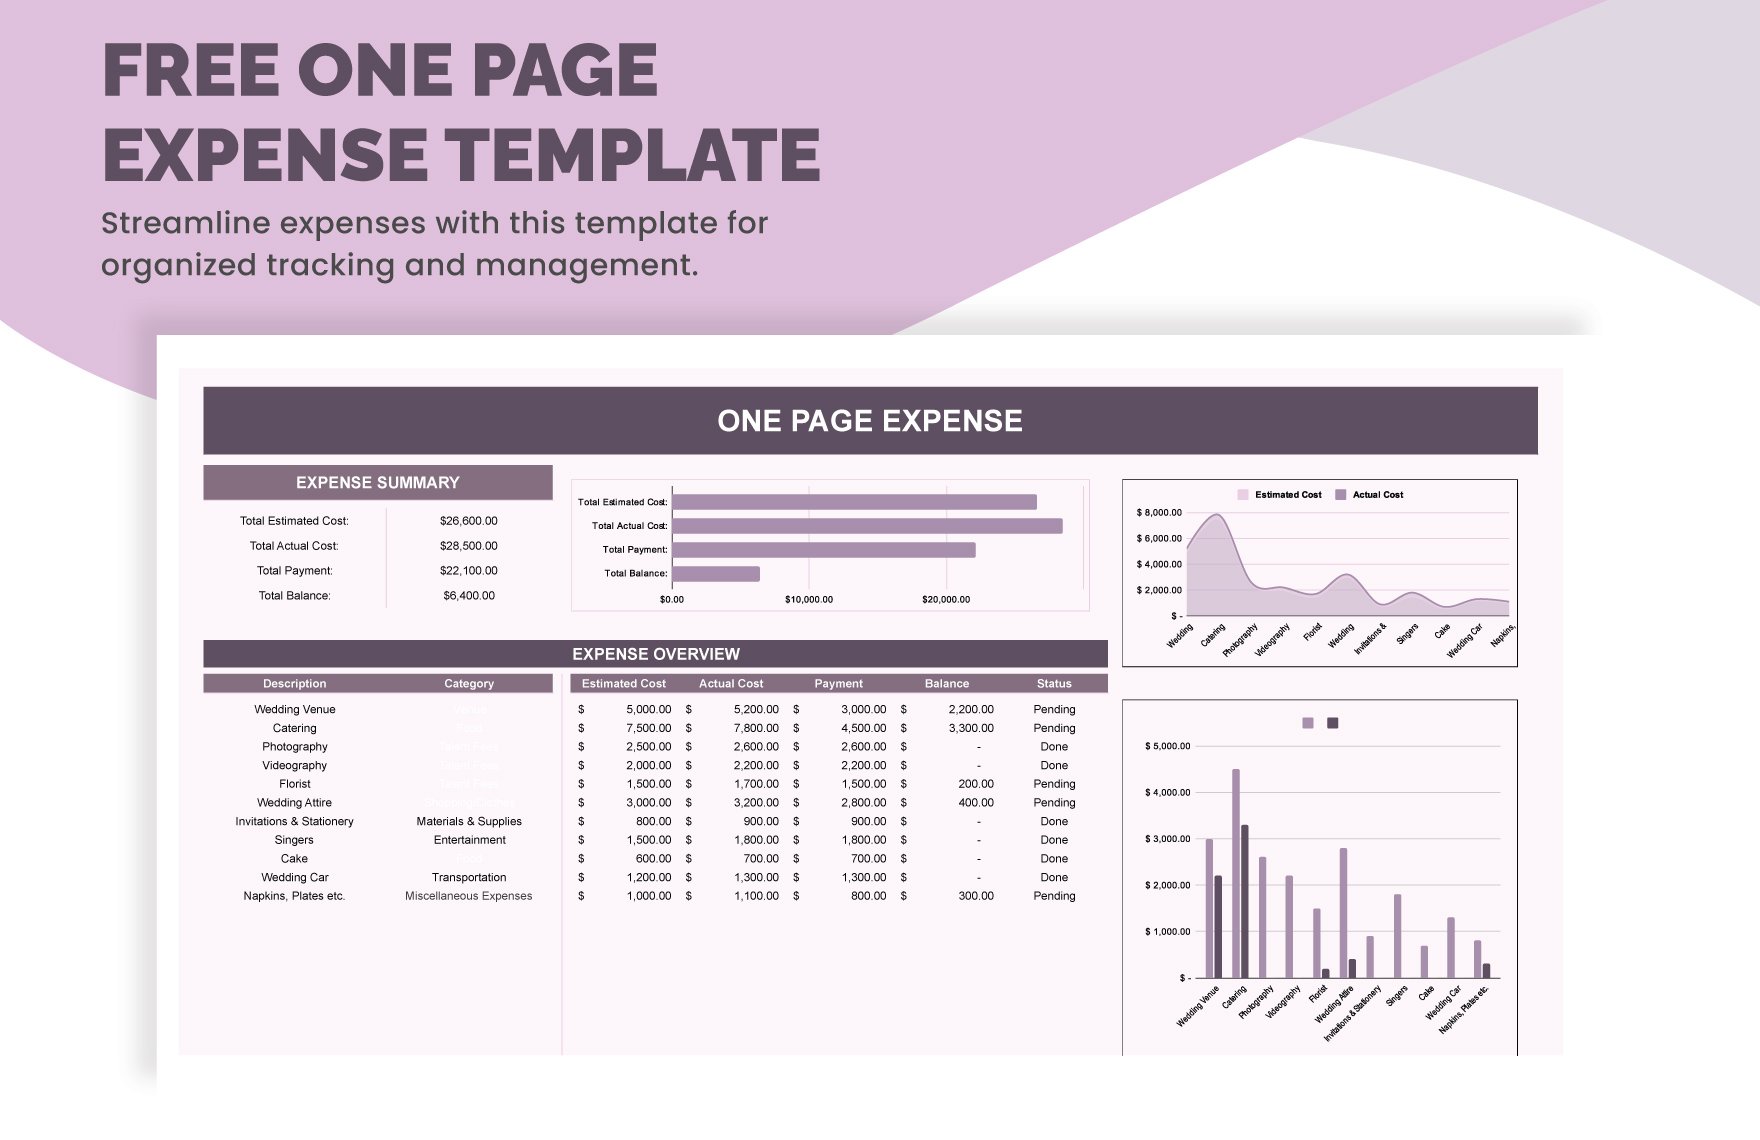 Free One Page Expense